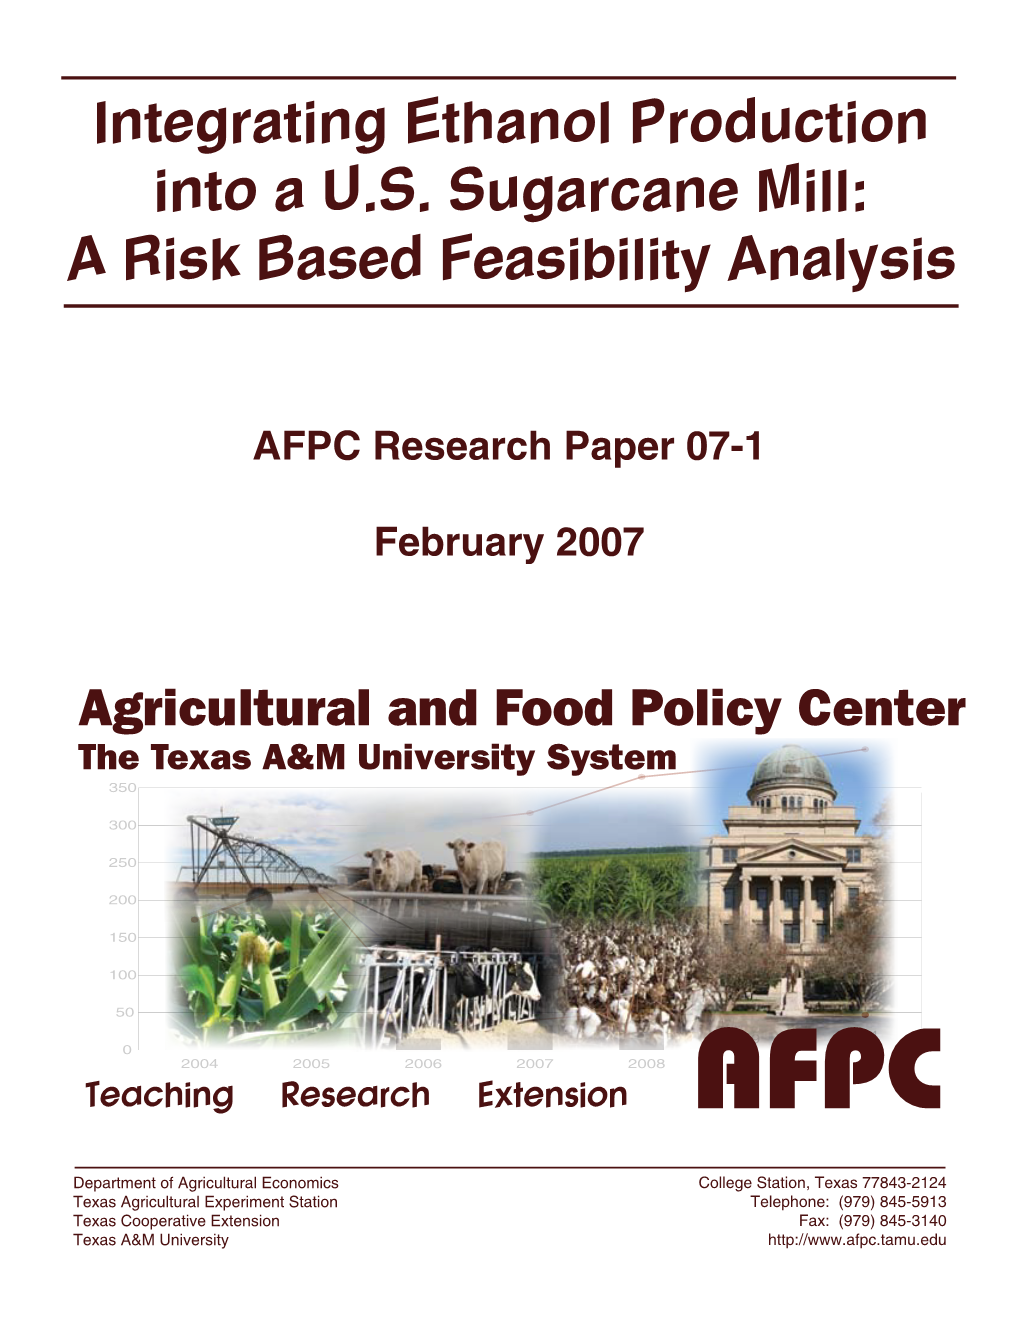 Integrating Ethanol Production Into a U.S. Sugarcane Mill: a Risk Based Feasibility Analysis